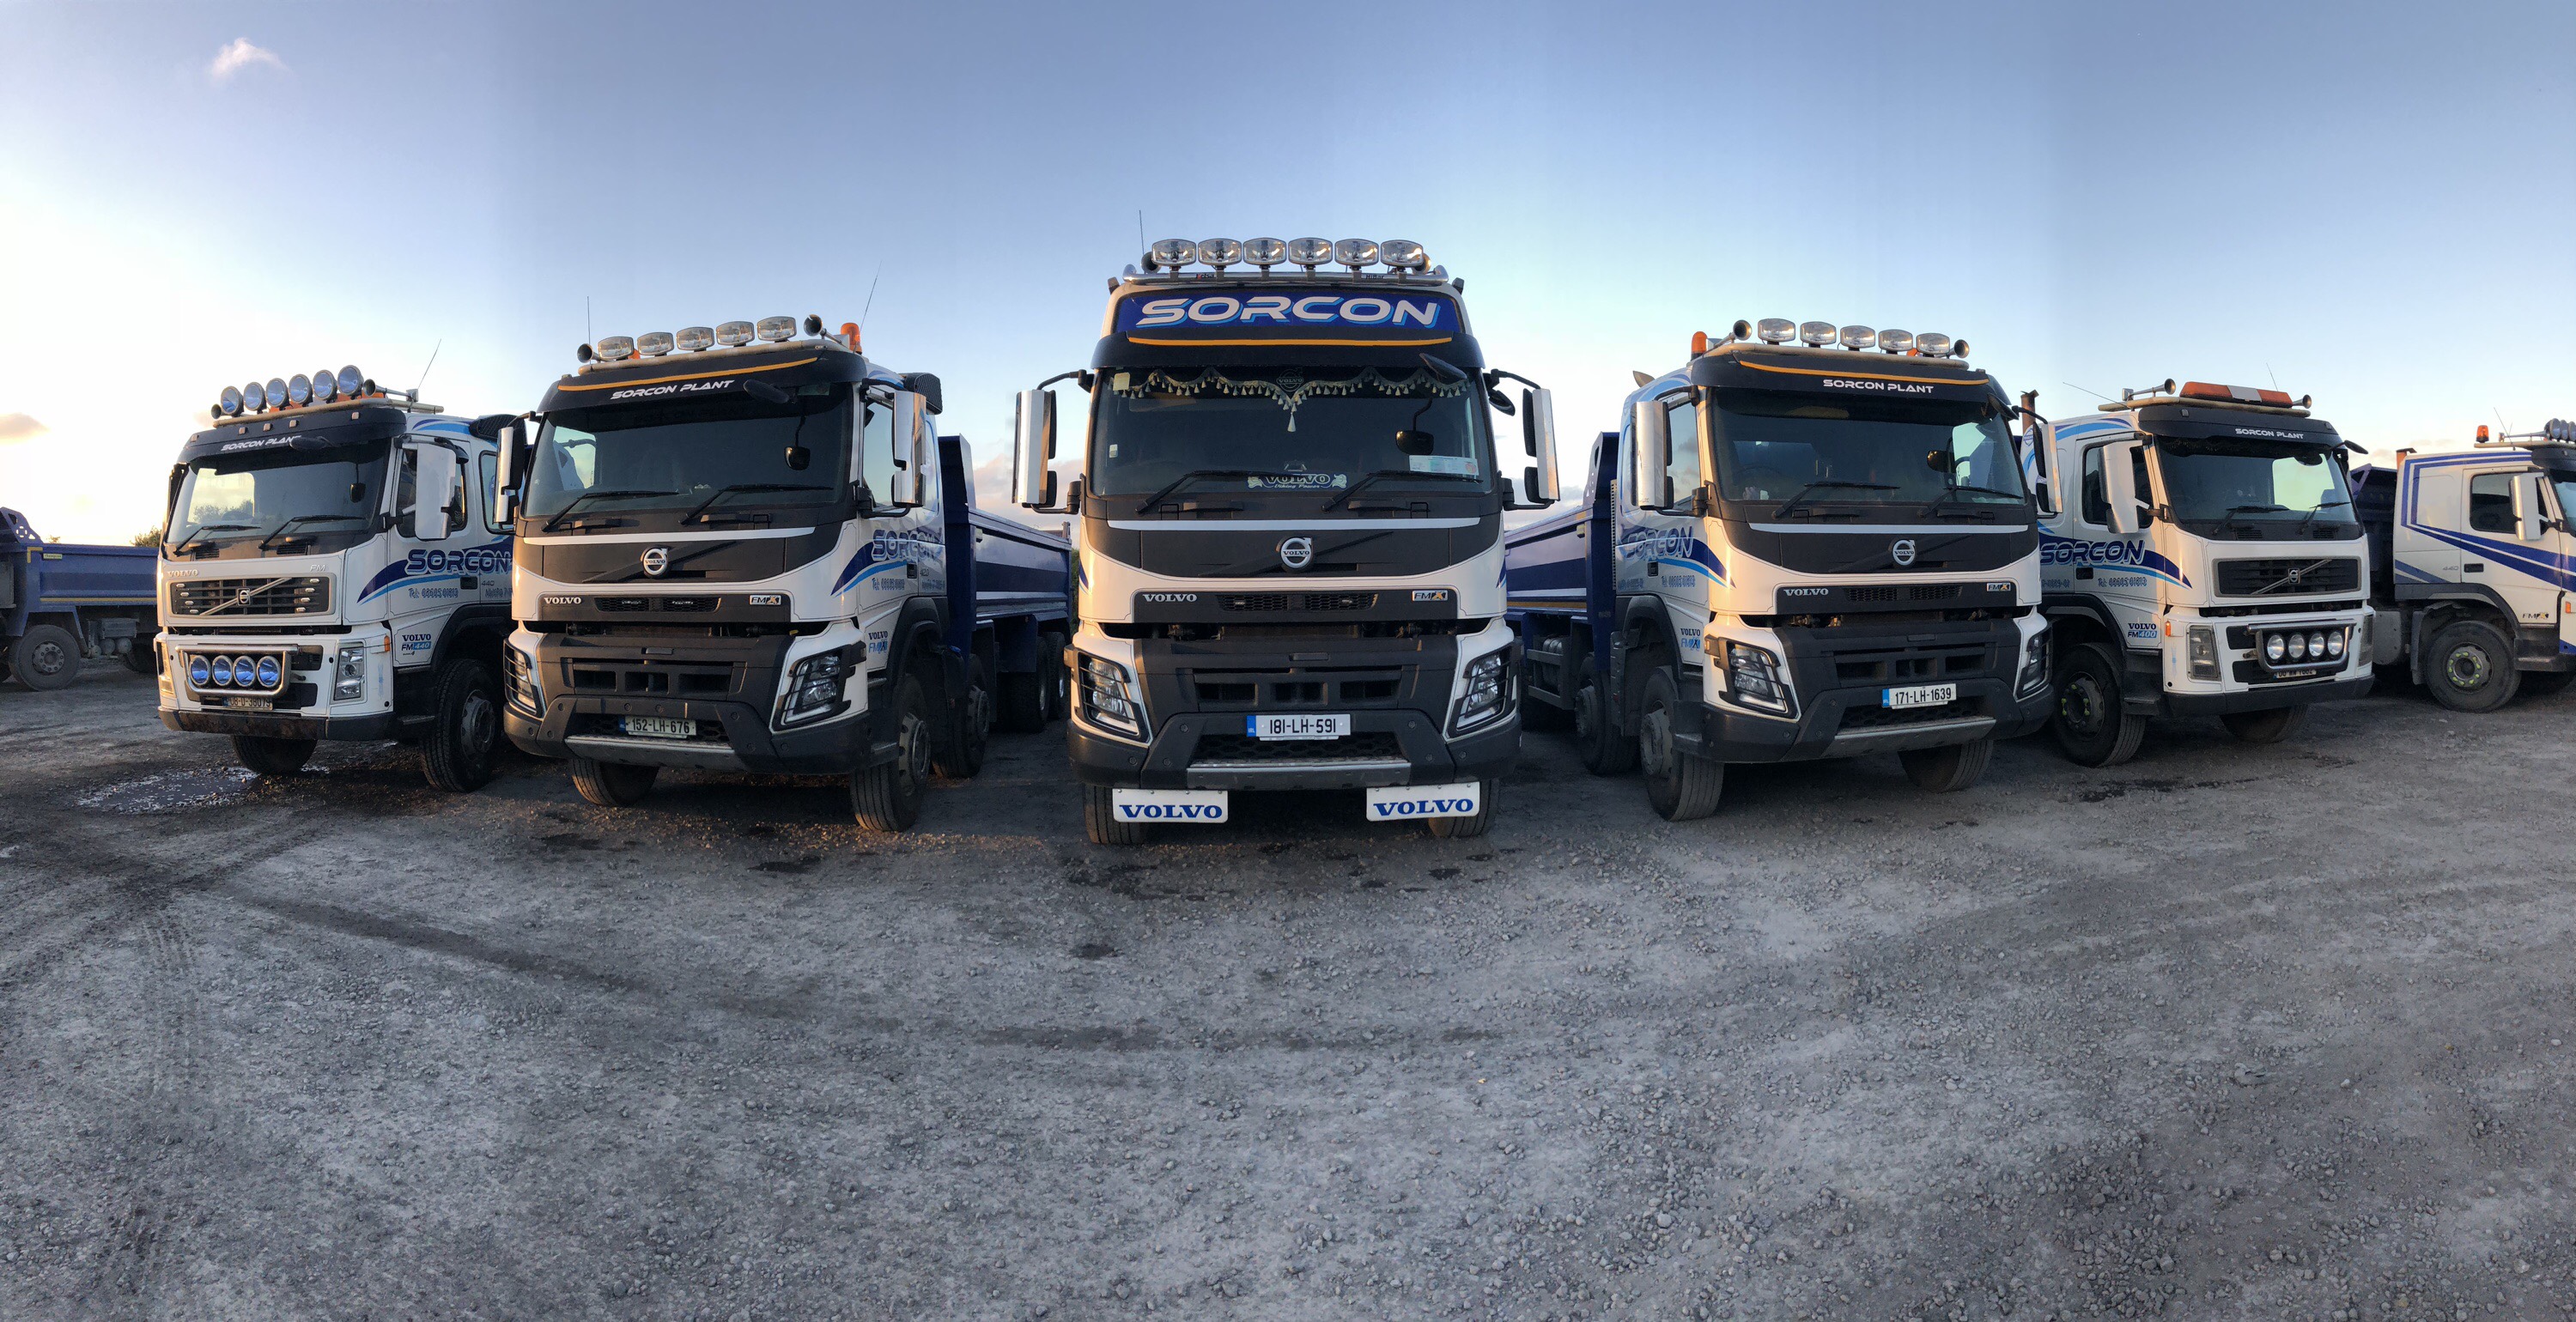 Pictures of trucks at work